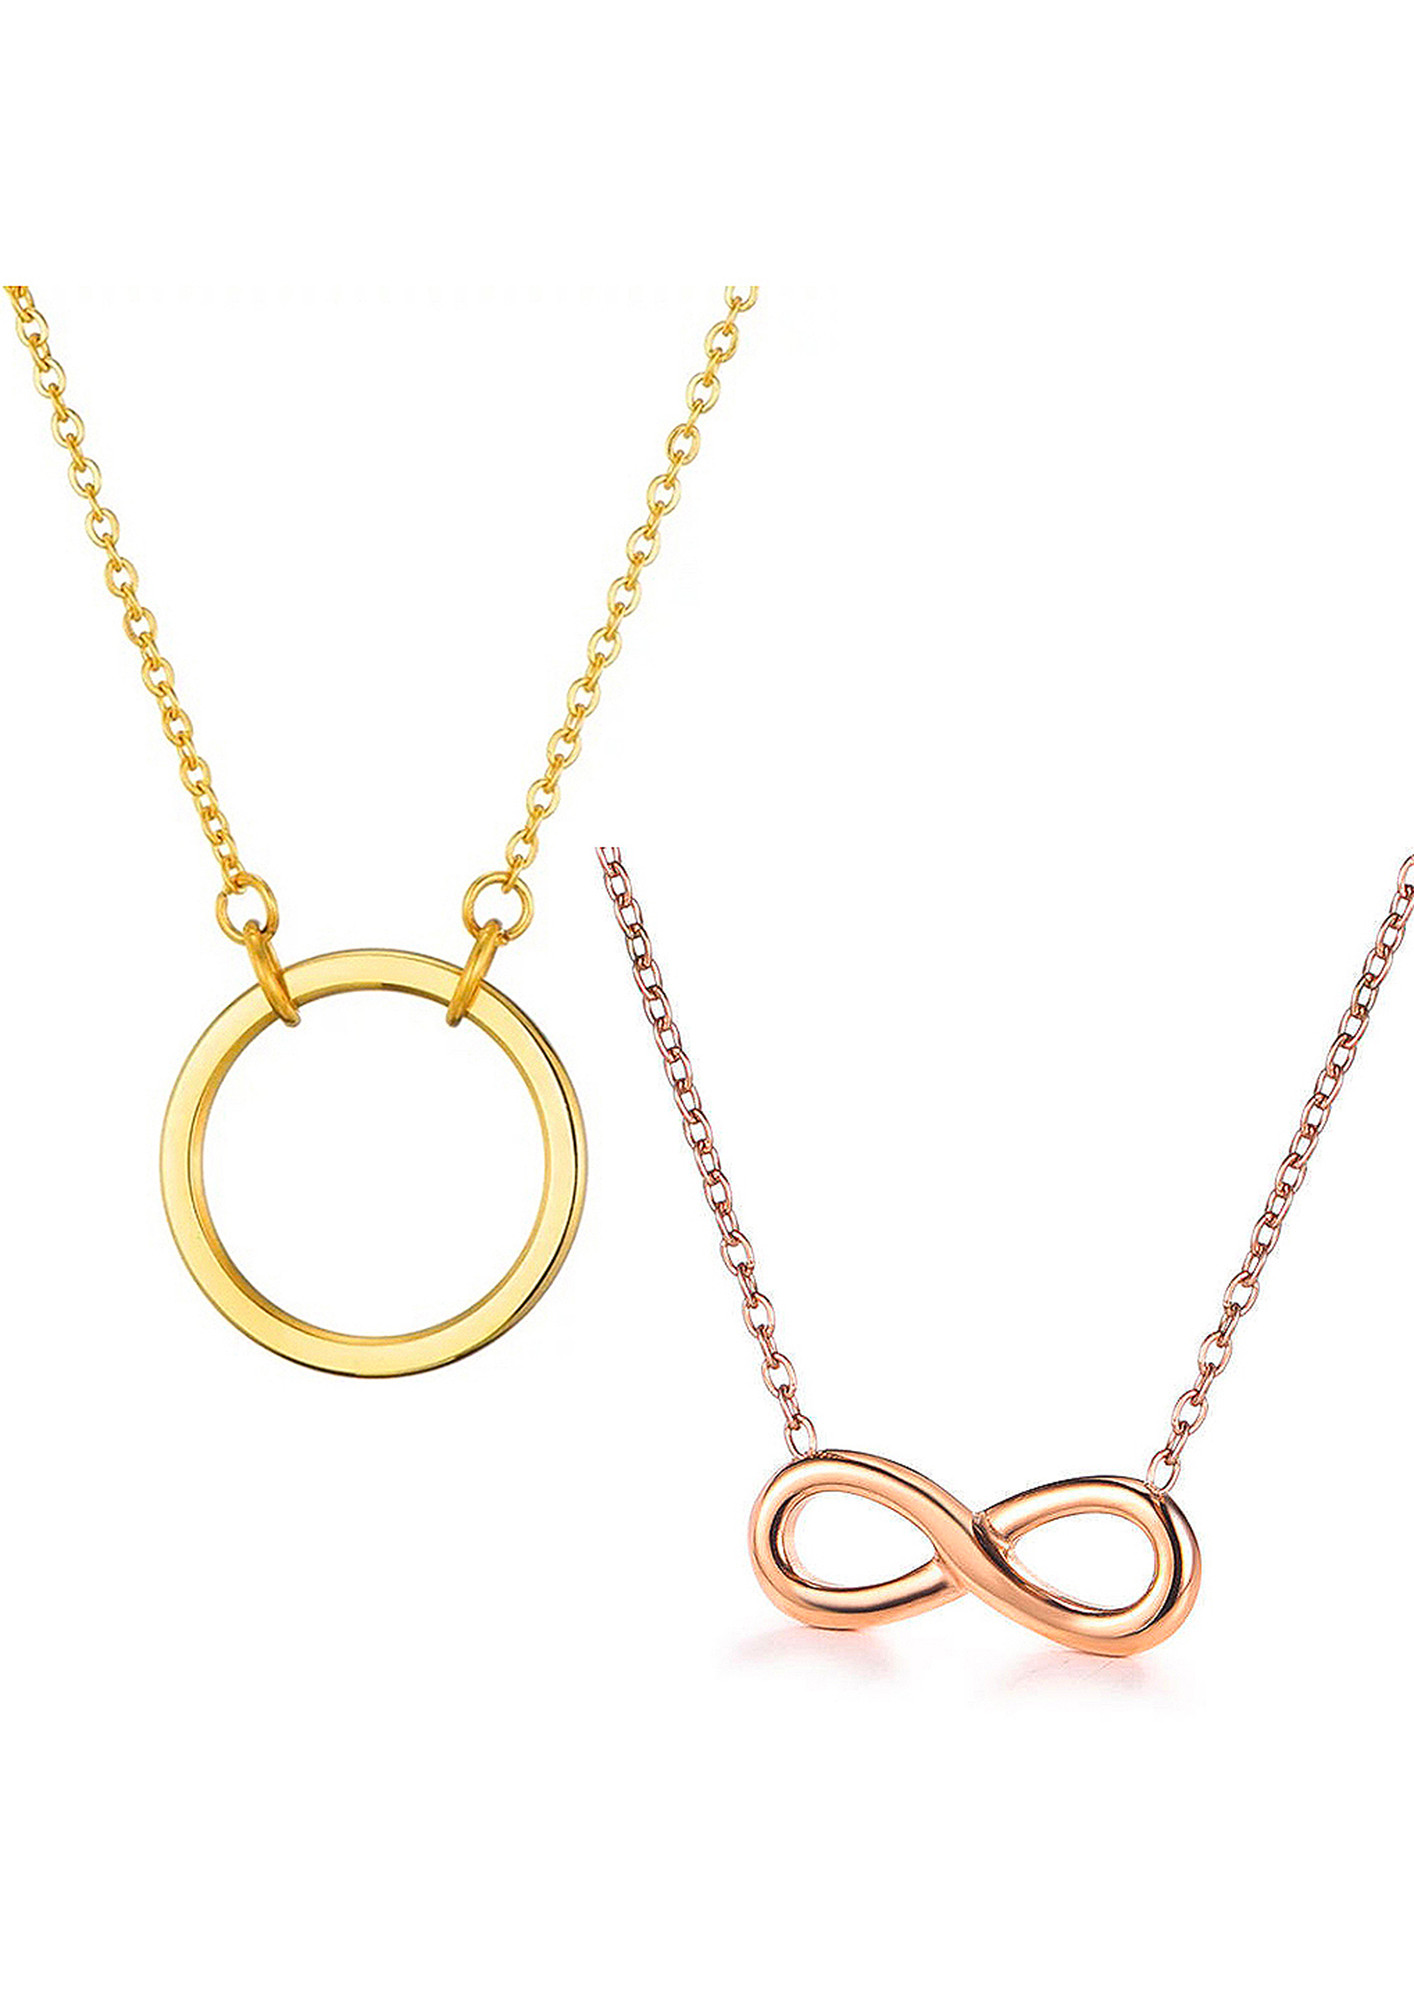 Vembley Combo Of 2 Infinite and Single Layered Double Circle Ring Pendant  Necklace Gold-plated Plated Alloy Necklace Price in India - Buy Vembley  Combo Of 2 Infinite and Single Layered Double Circle